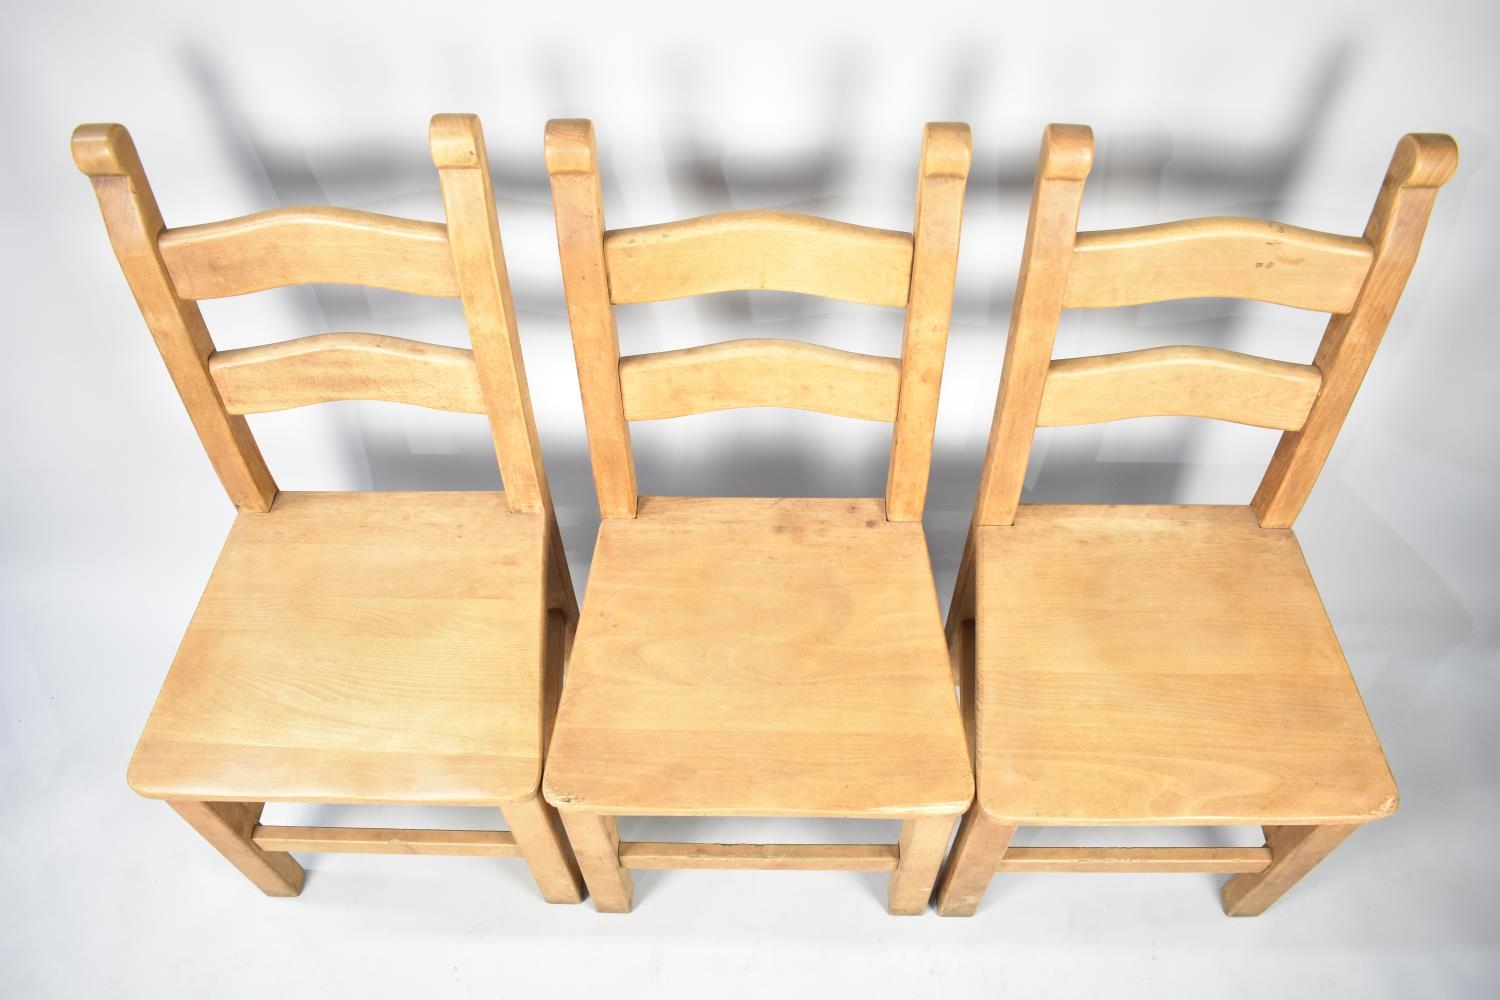 A Set of Three Hardwood Ladder Back Dining Chairs - Image 2 of 2